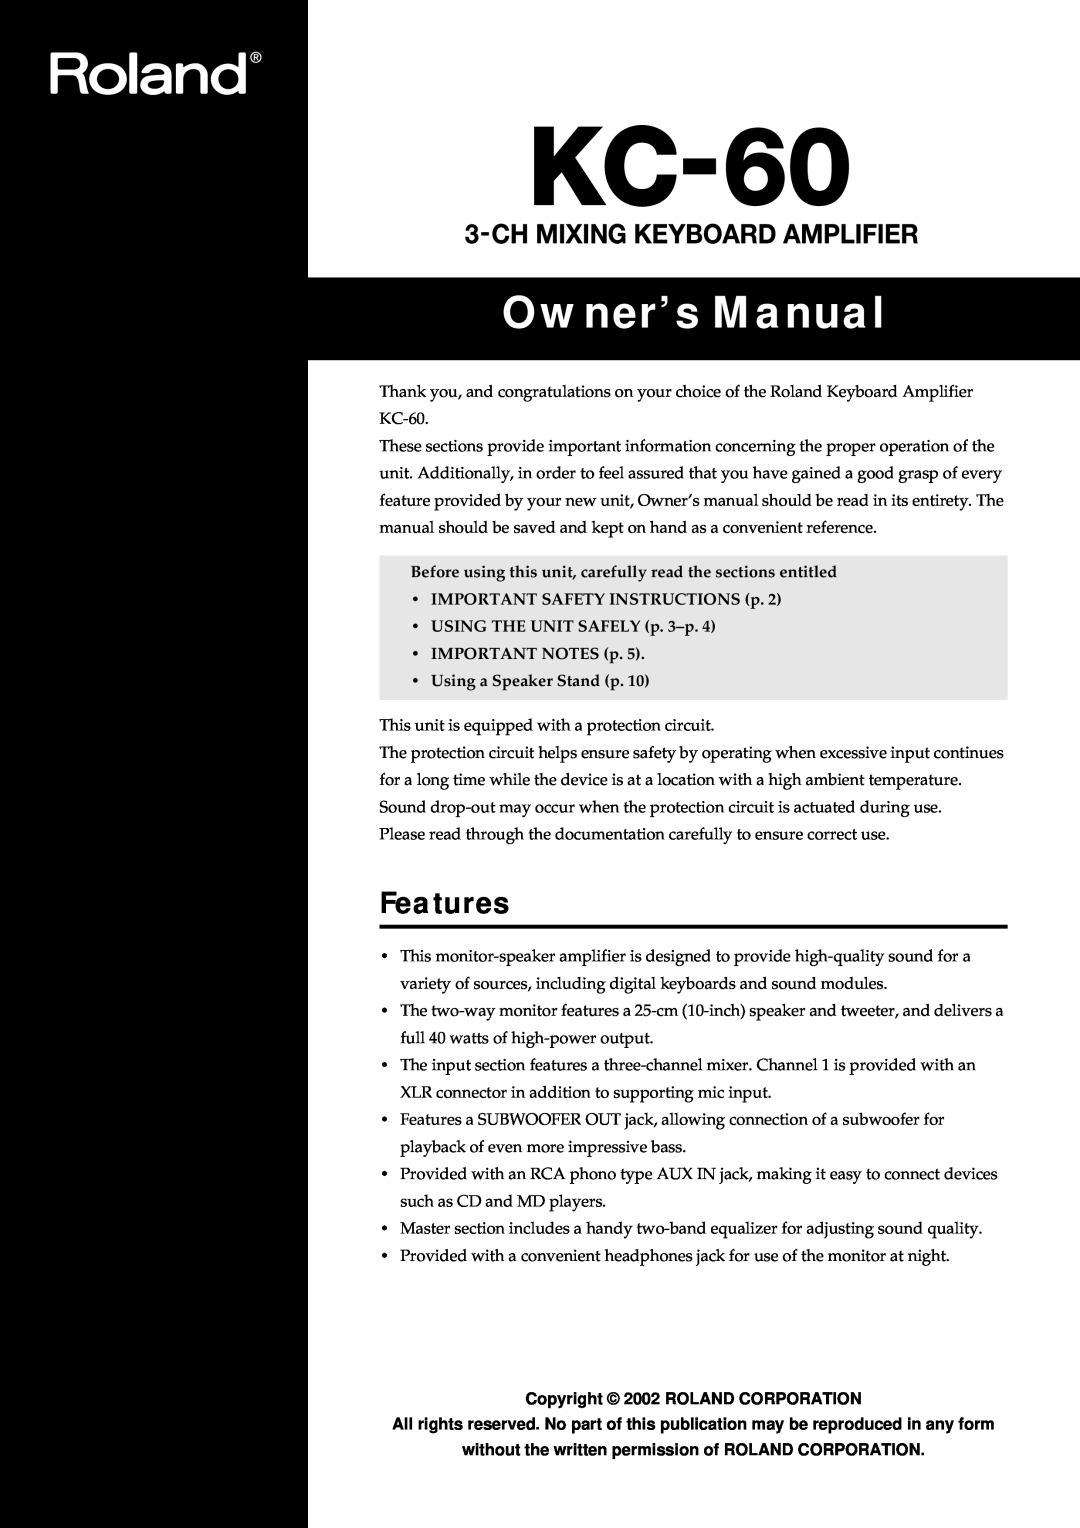 Roland KC-60 owner manual Features, Before using this unit, carefully read the sections entitled 